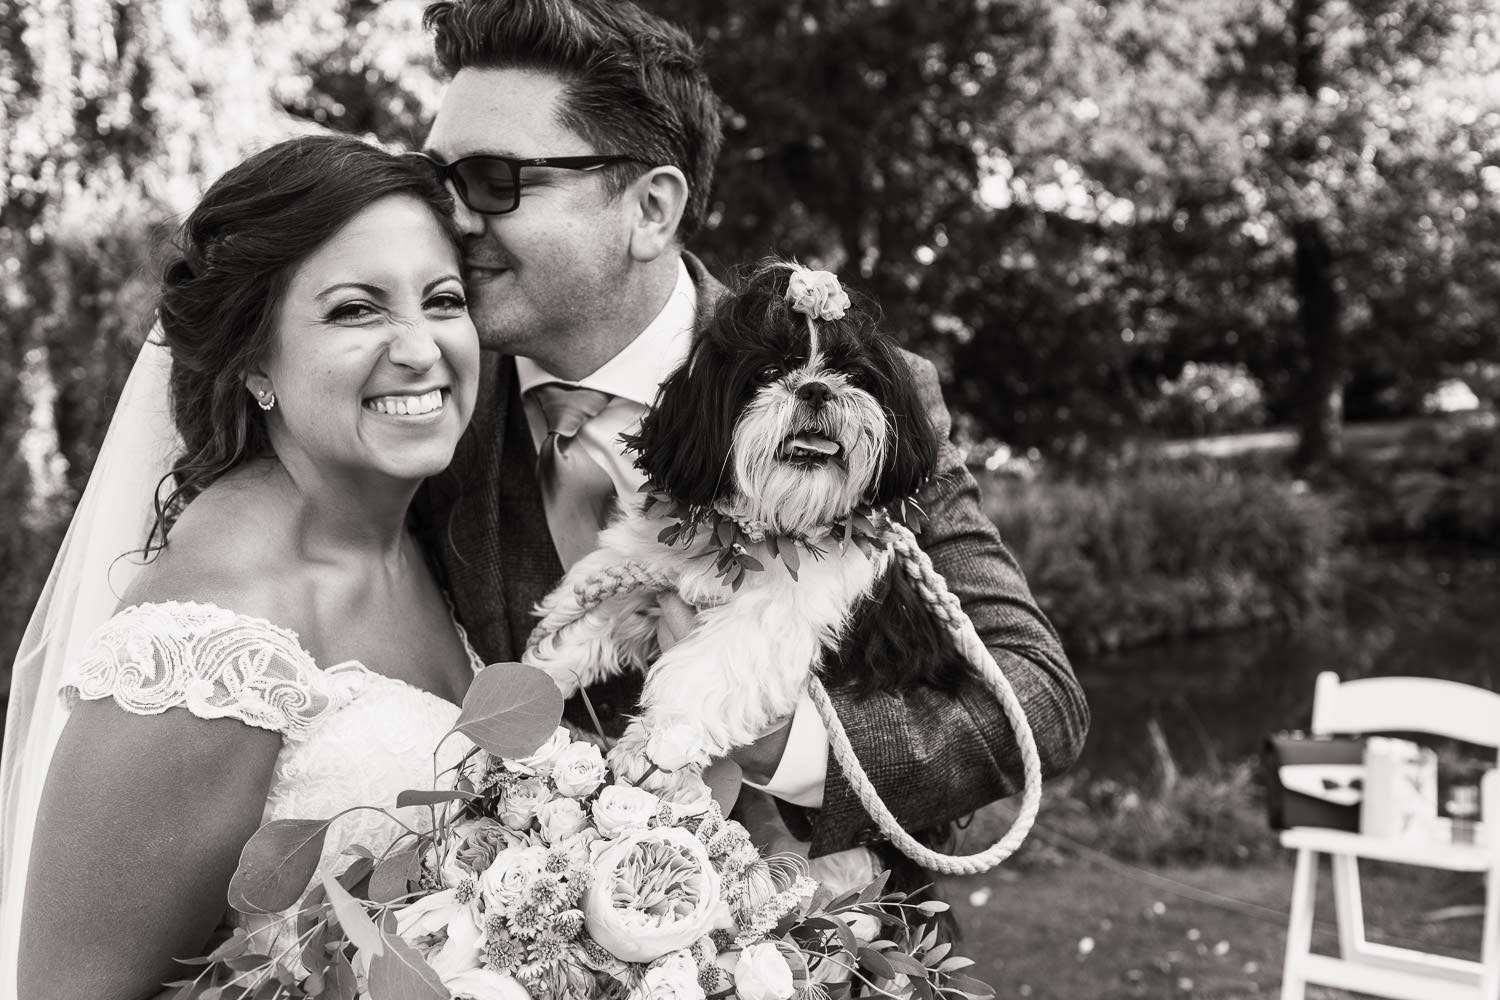 A black and white portrait of a bride, groom and their dog. The man is pressing his nose up to his new wife's head. She is smiling at the camera.